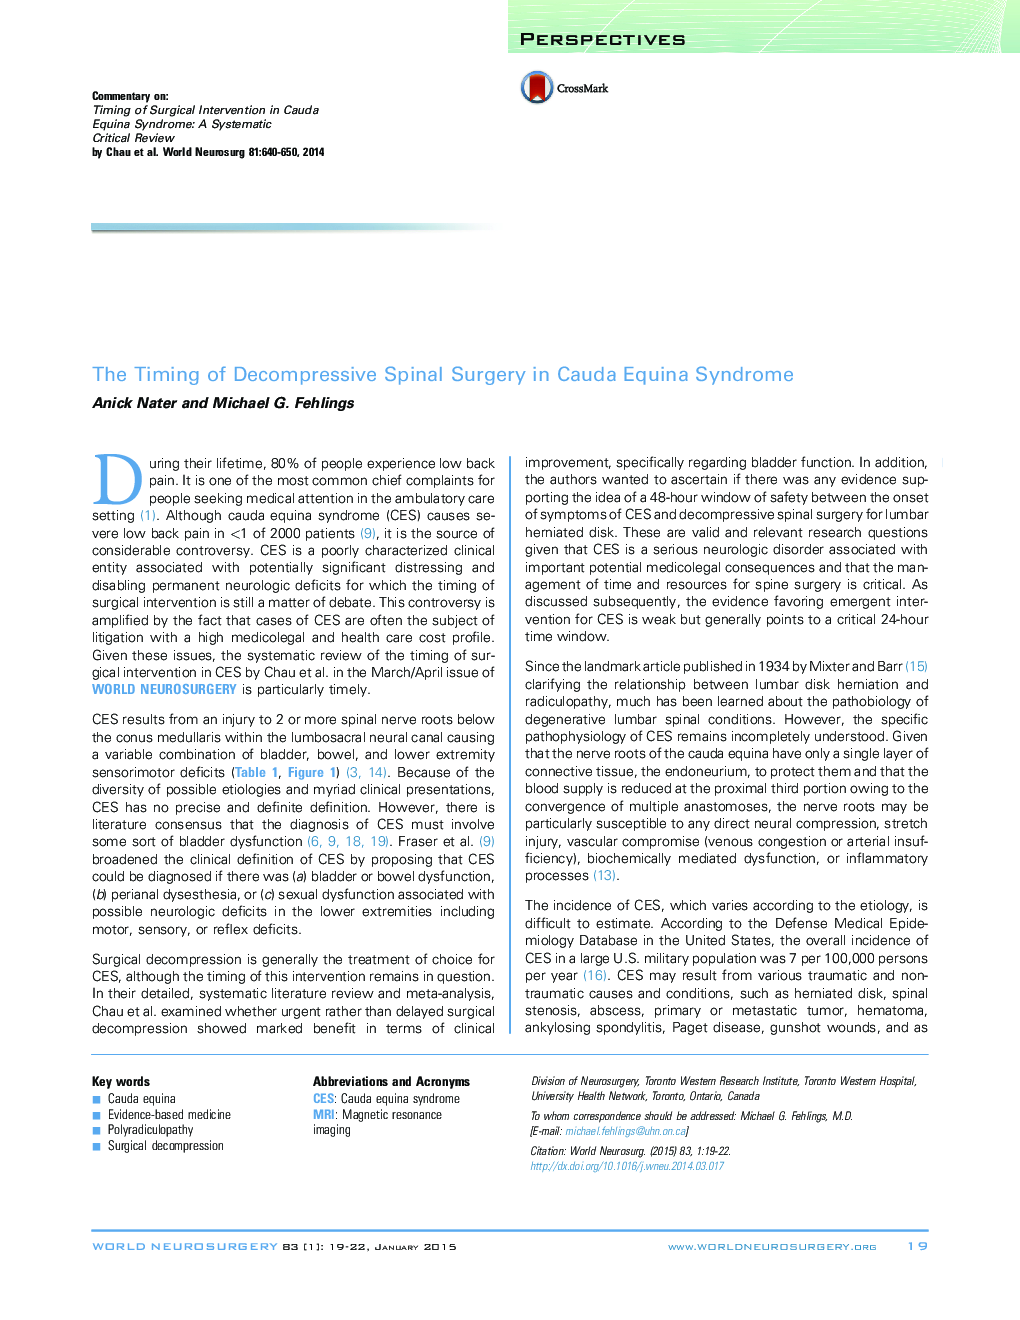 The Timing of Decompressive Spinal Surgery in Cauda Equina Syndrome